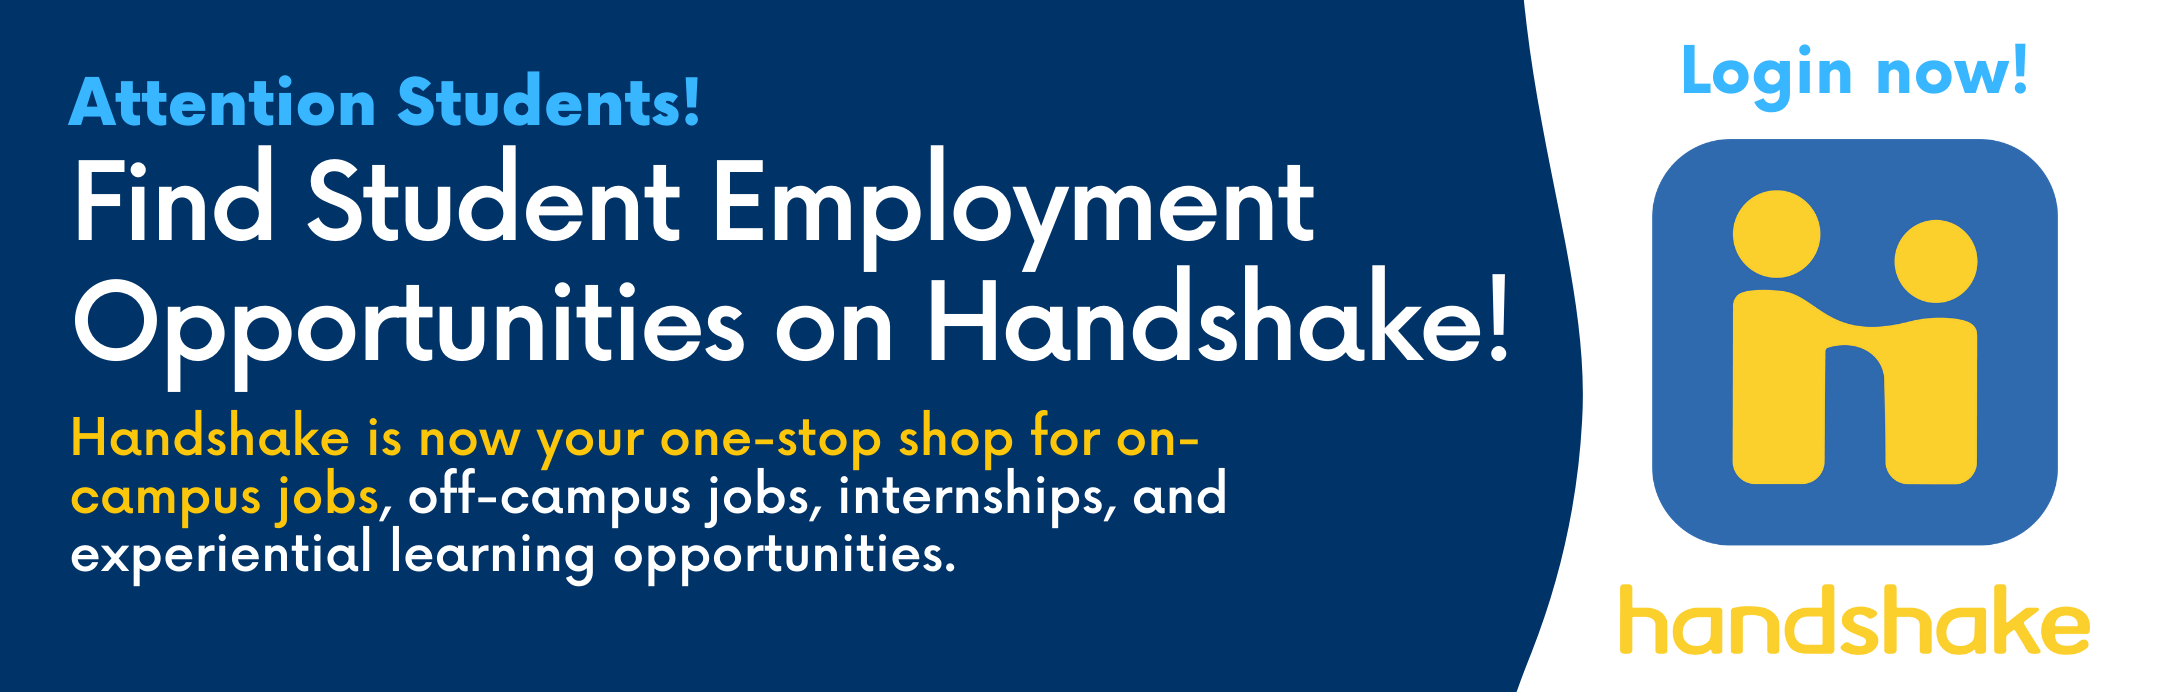 Attention Students! Find Student Employment Opportunities on Handshake! Handshake is now your one-stop shop for on-campus jobs, off-campus jobs, internships, and experiential learning opportunities. Click this banner to login now 